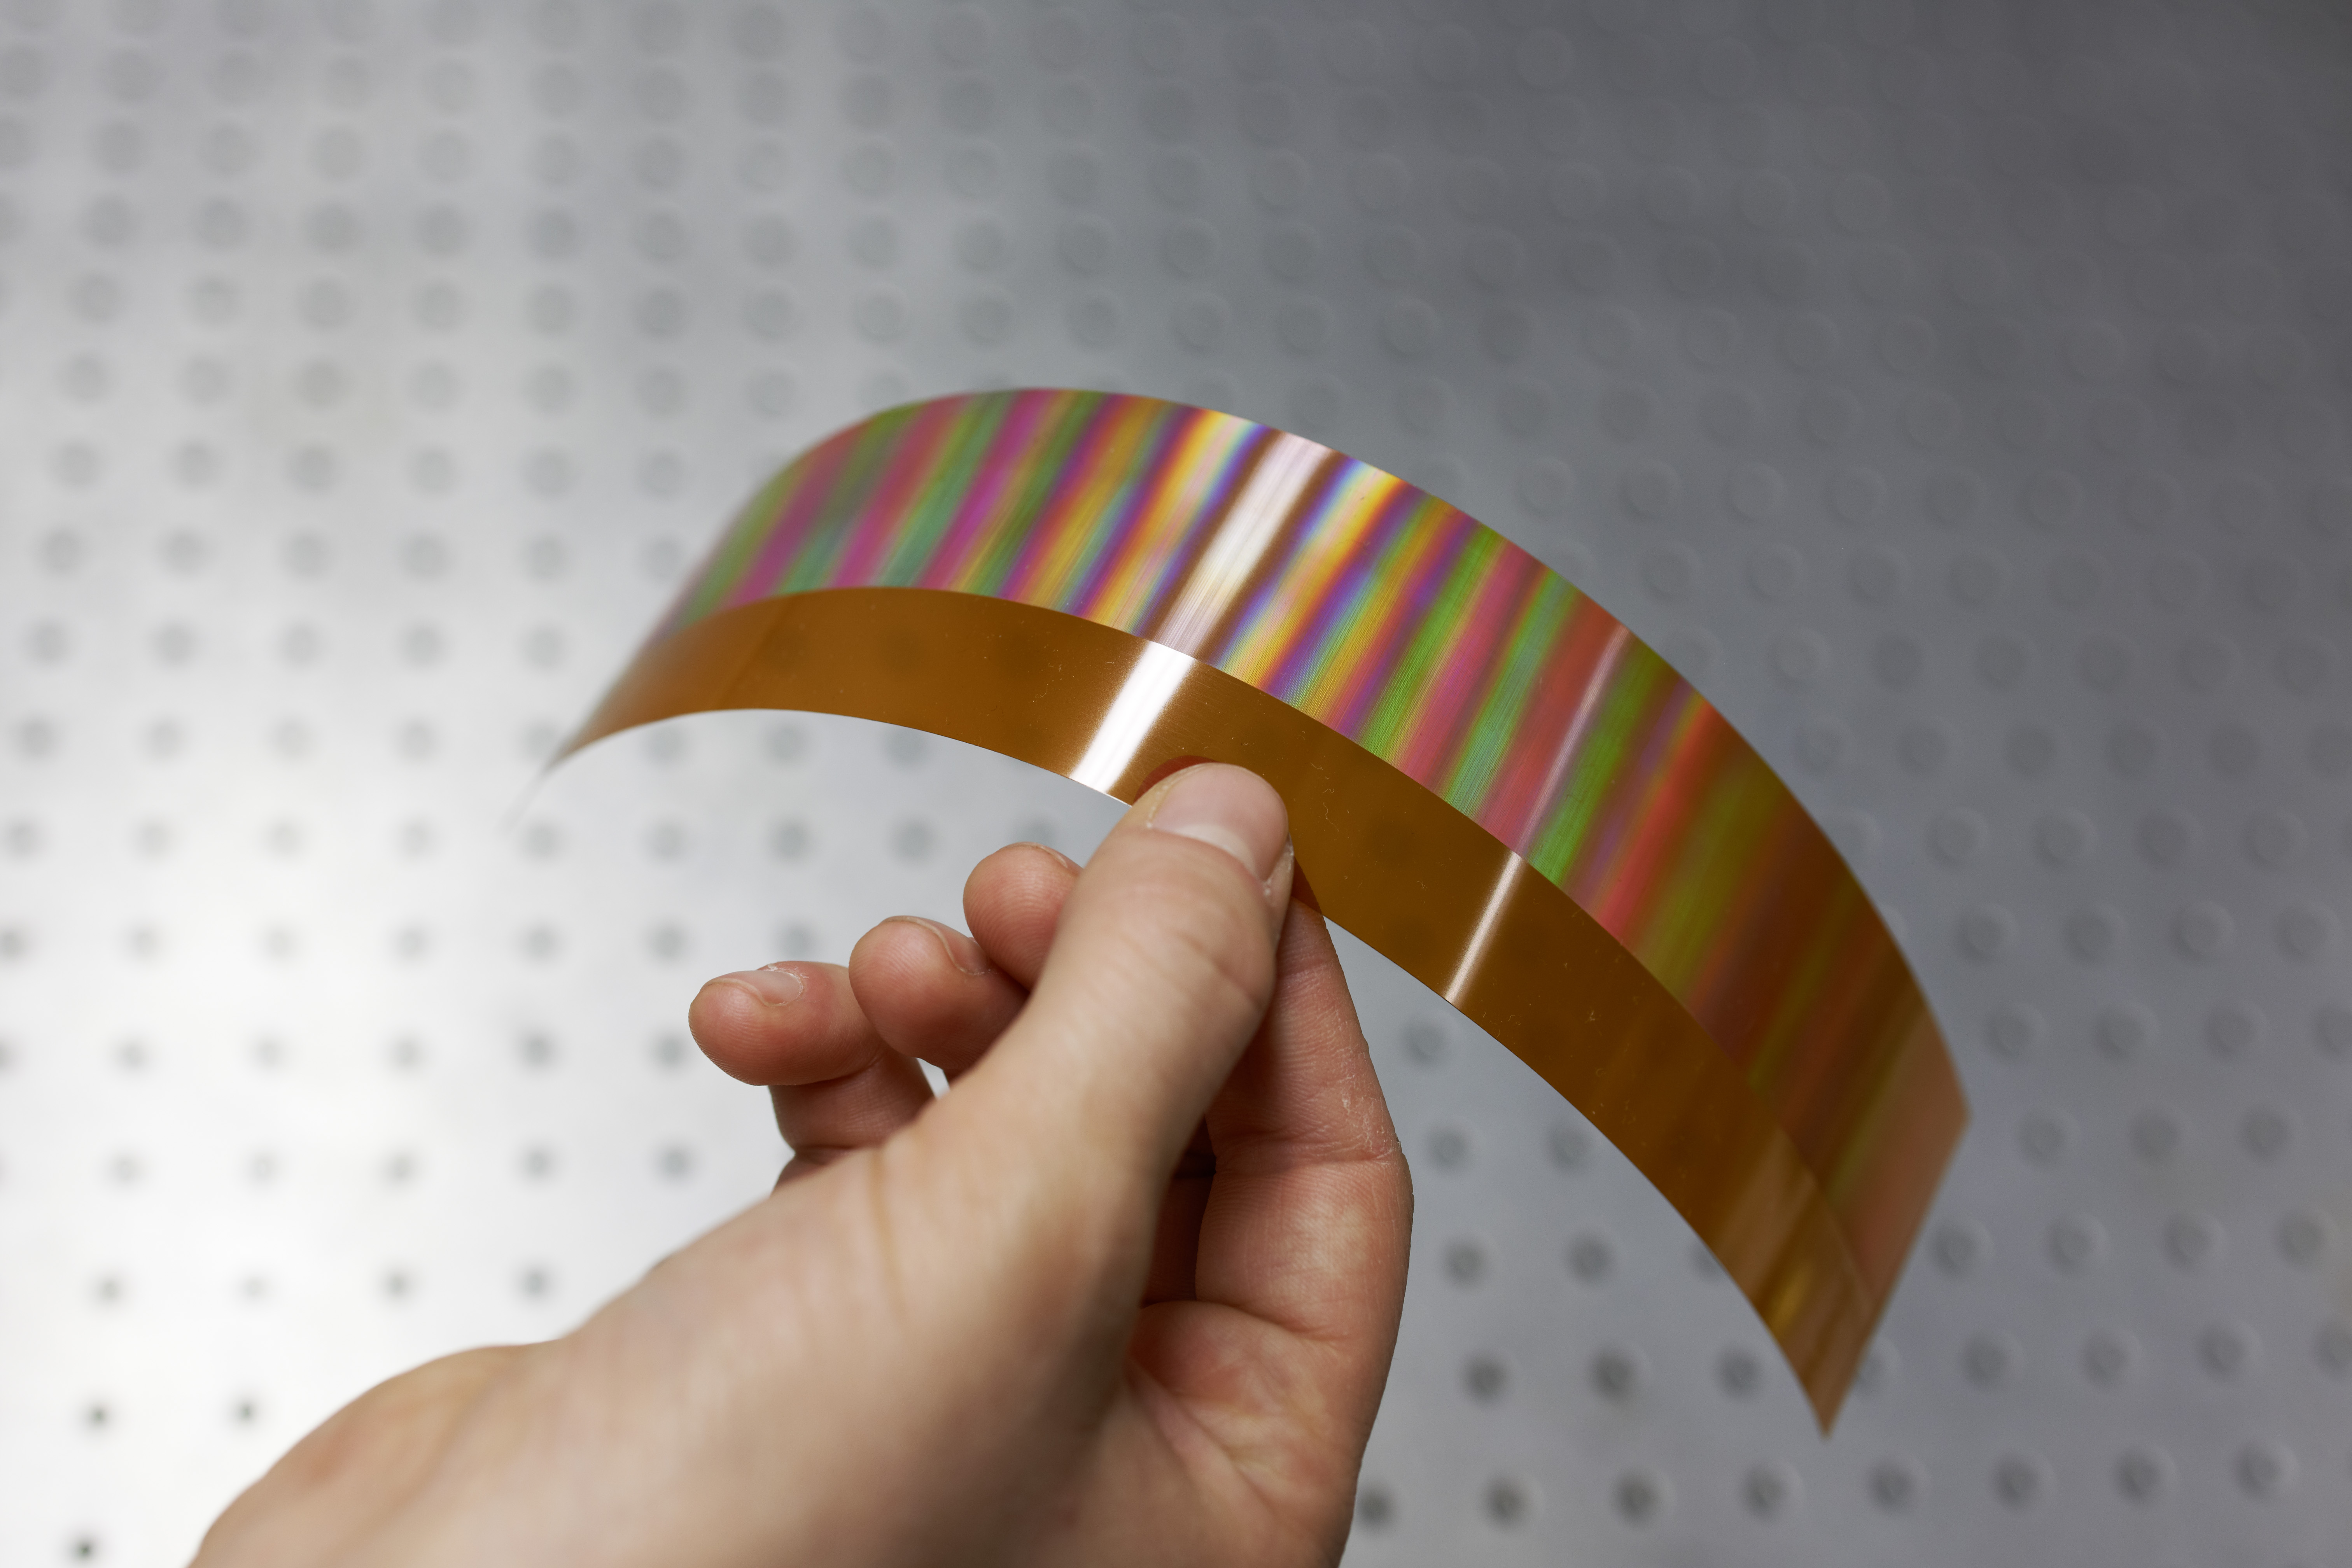 Polymer film, structured by means of laser interference technology